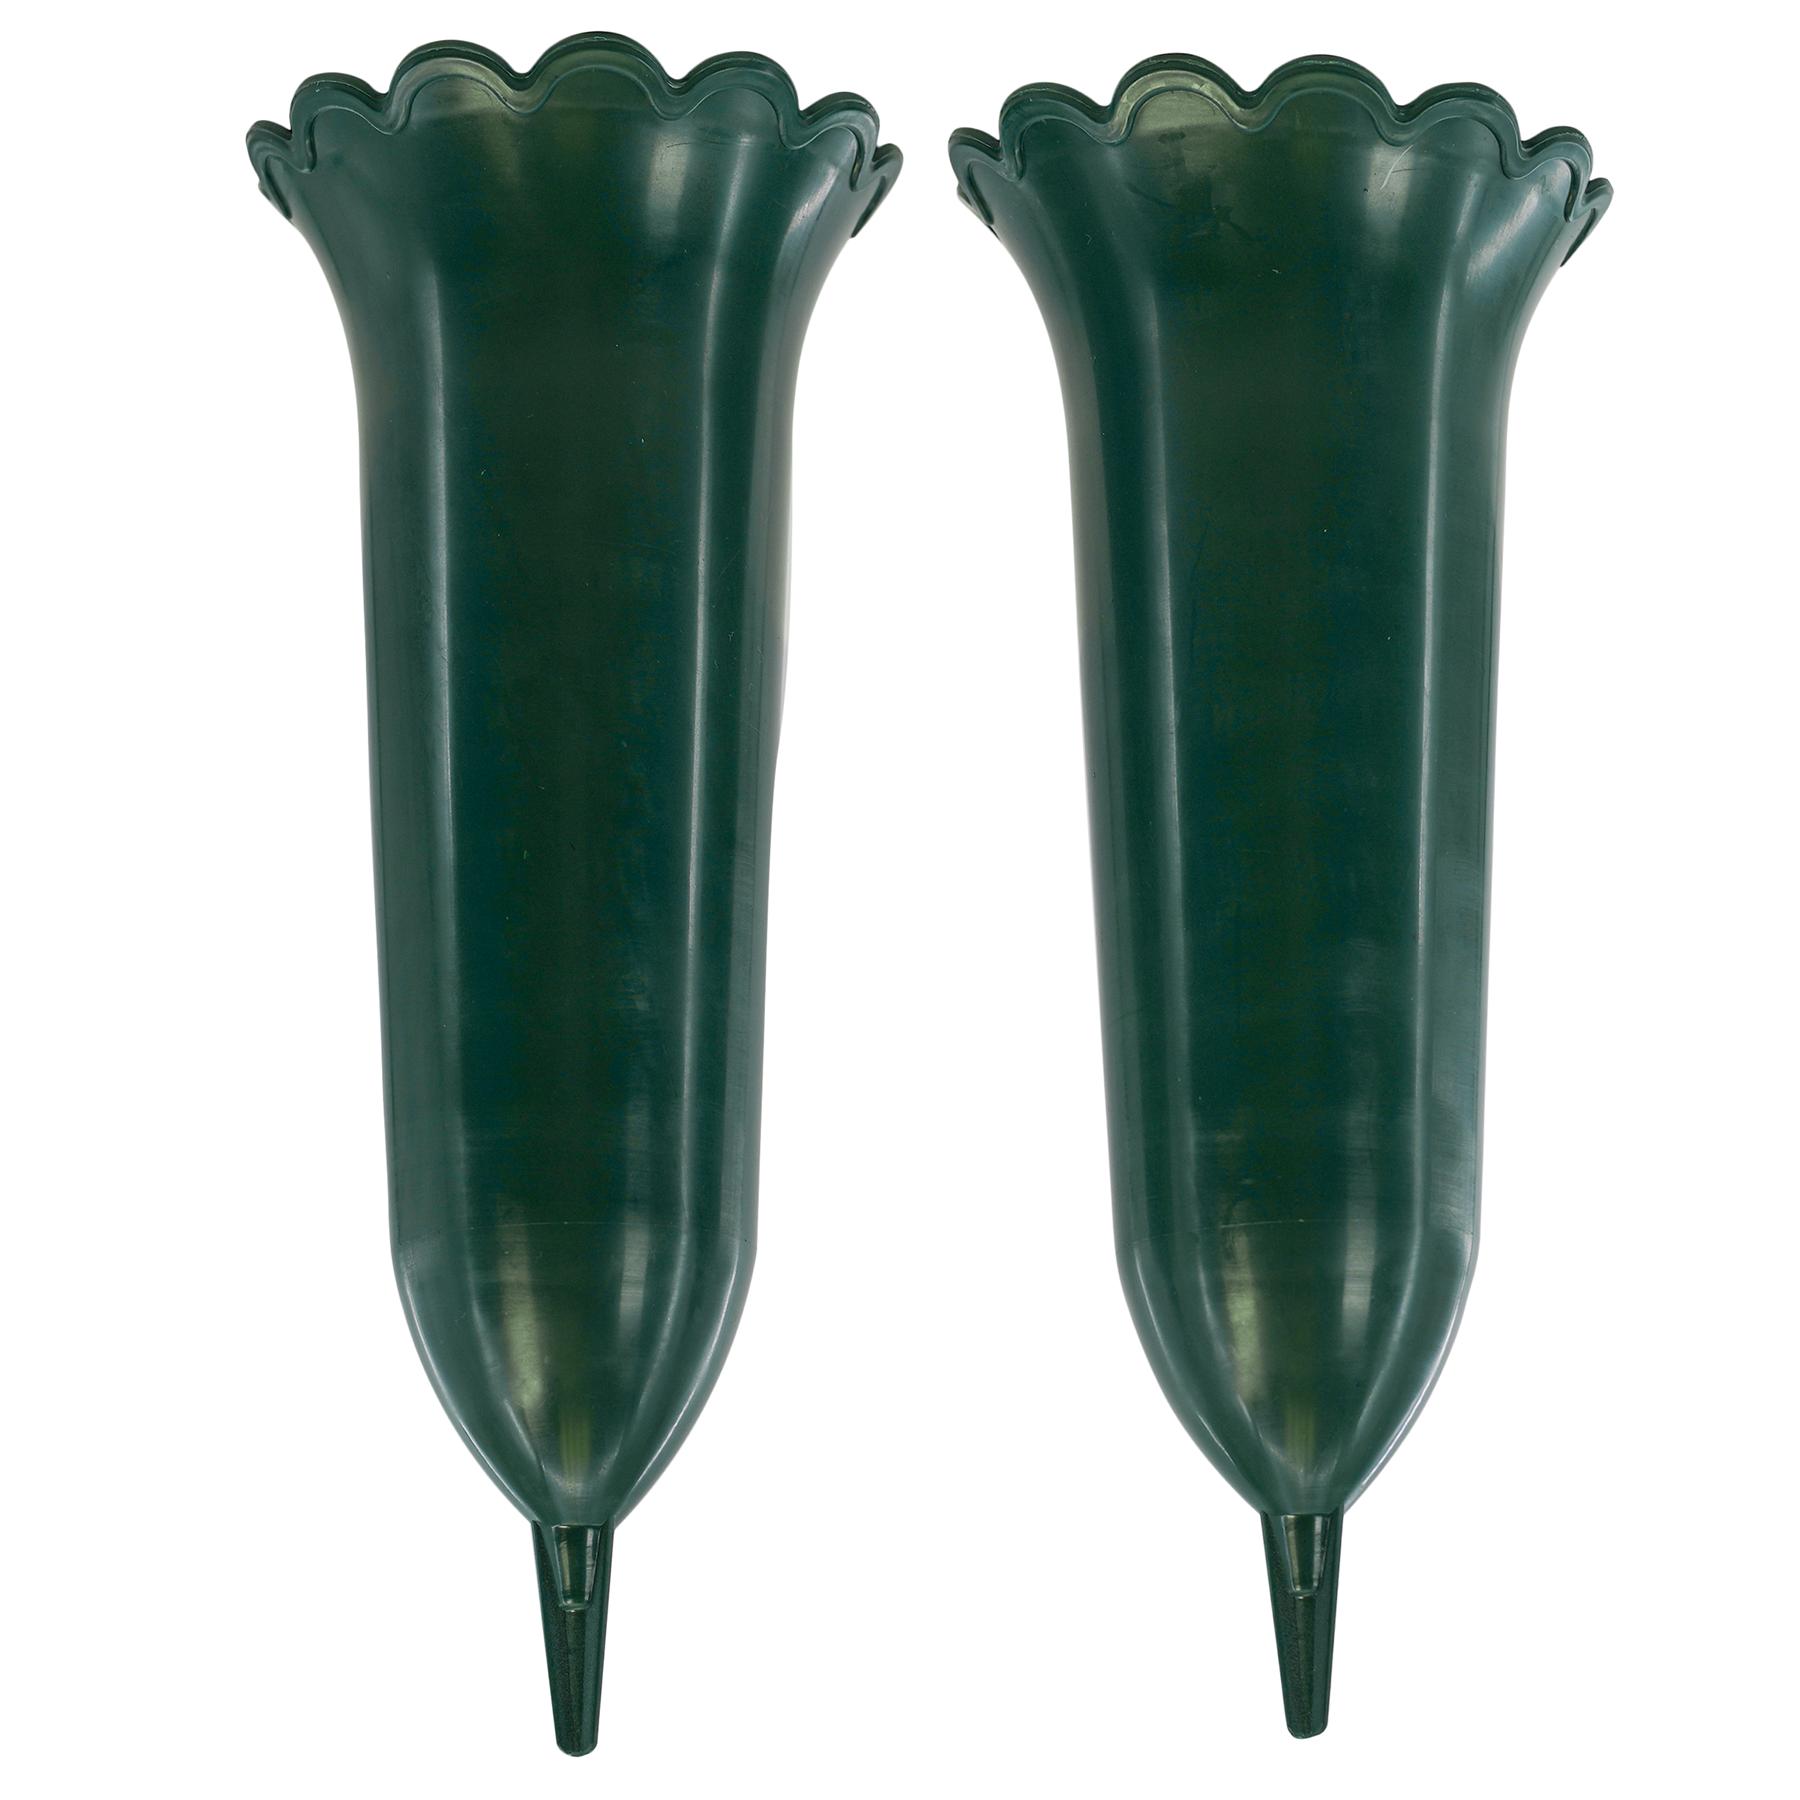 Set of 2 Green Spiked Memorial Grave Flower Vases GEEZY - The Magic Toy Shop